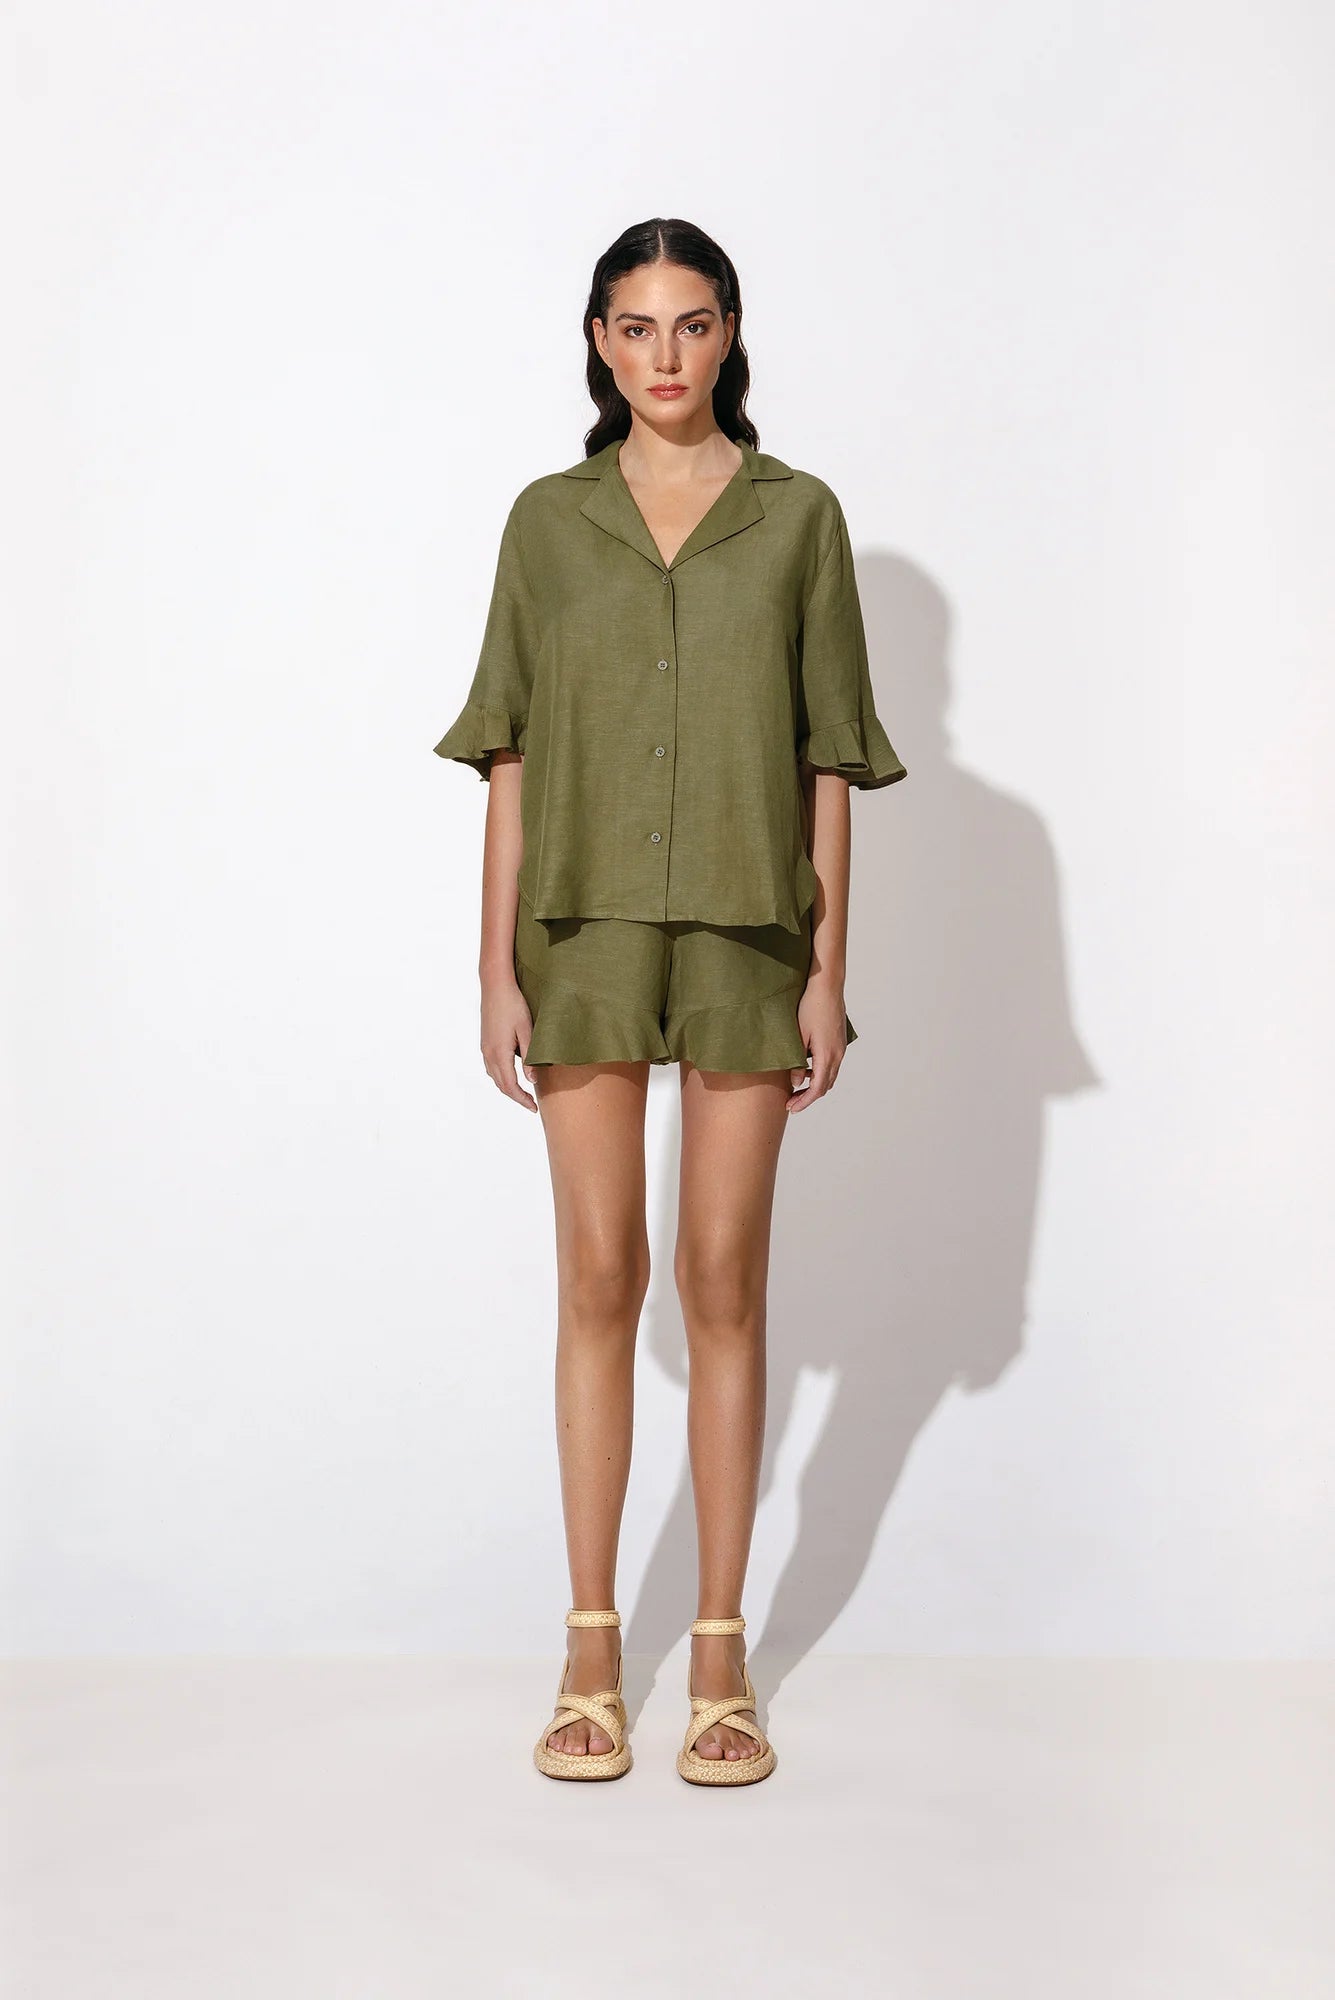 BY MALINA Elie Shirt In Olive